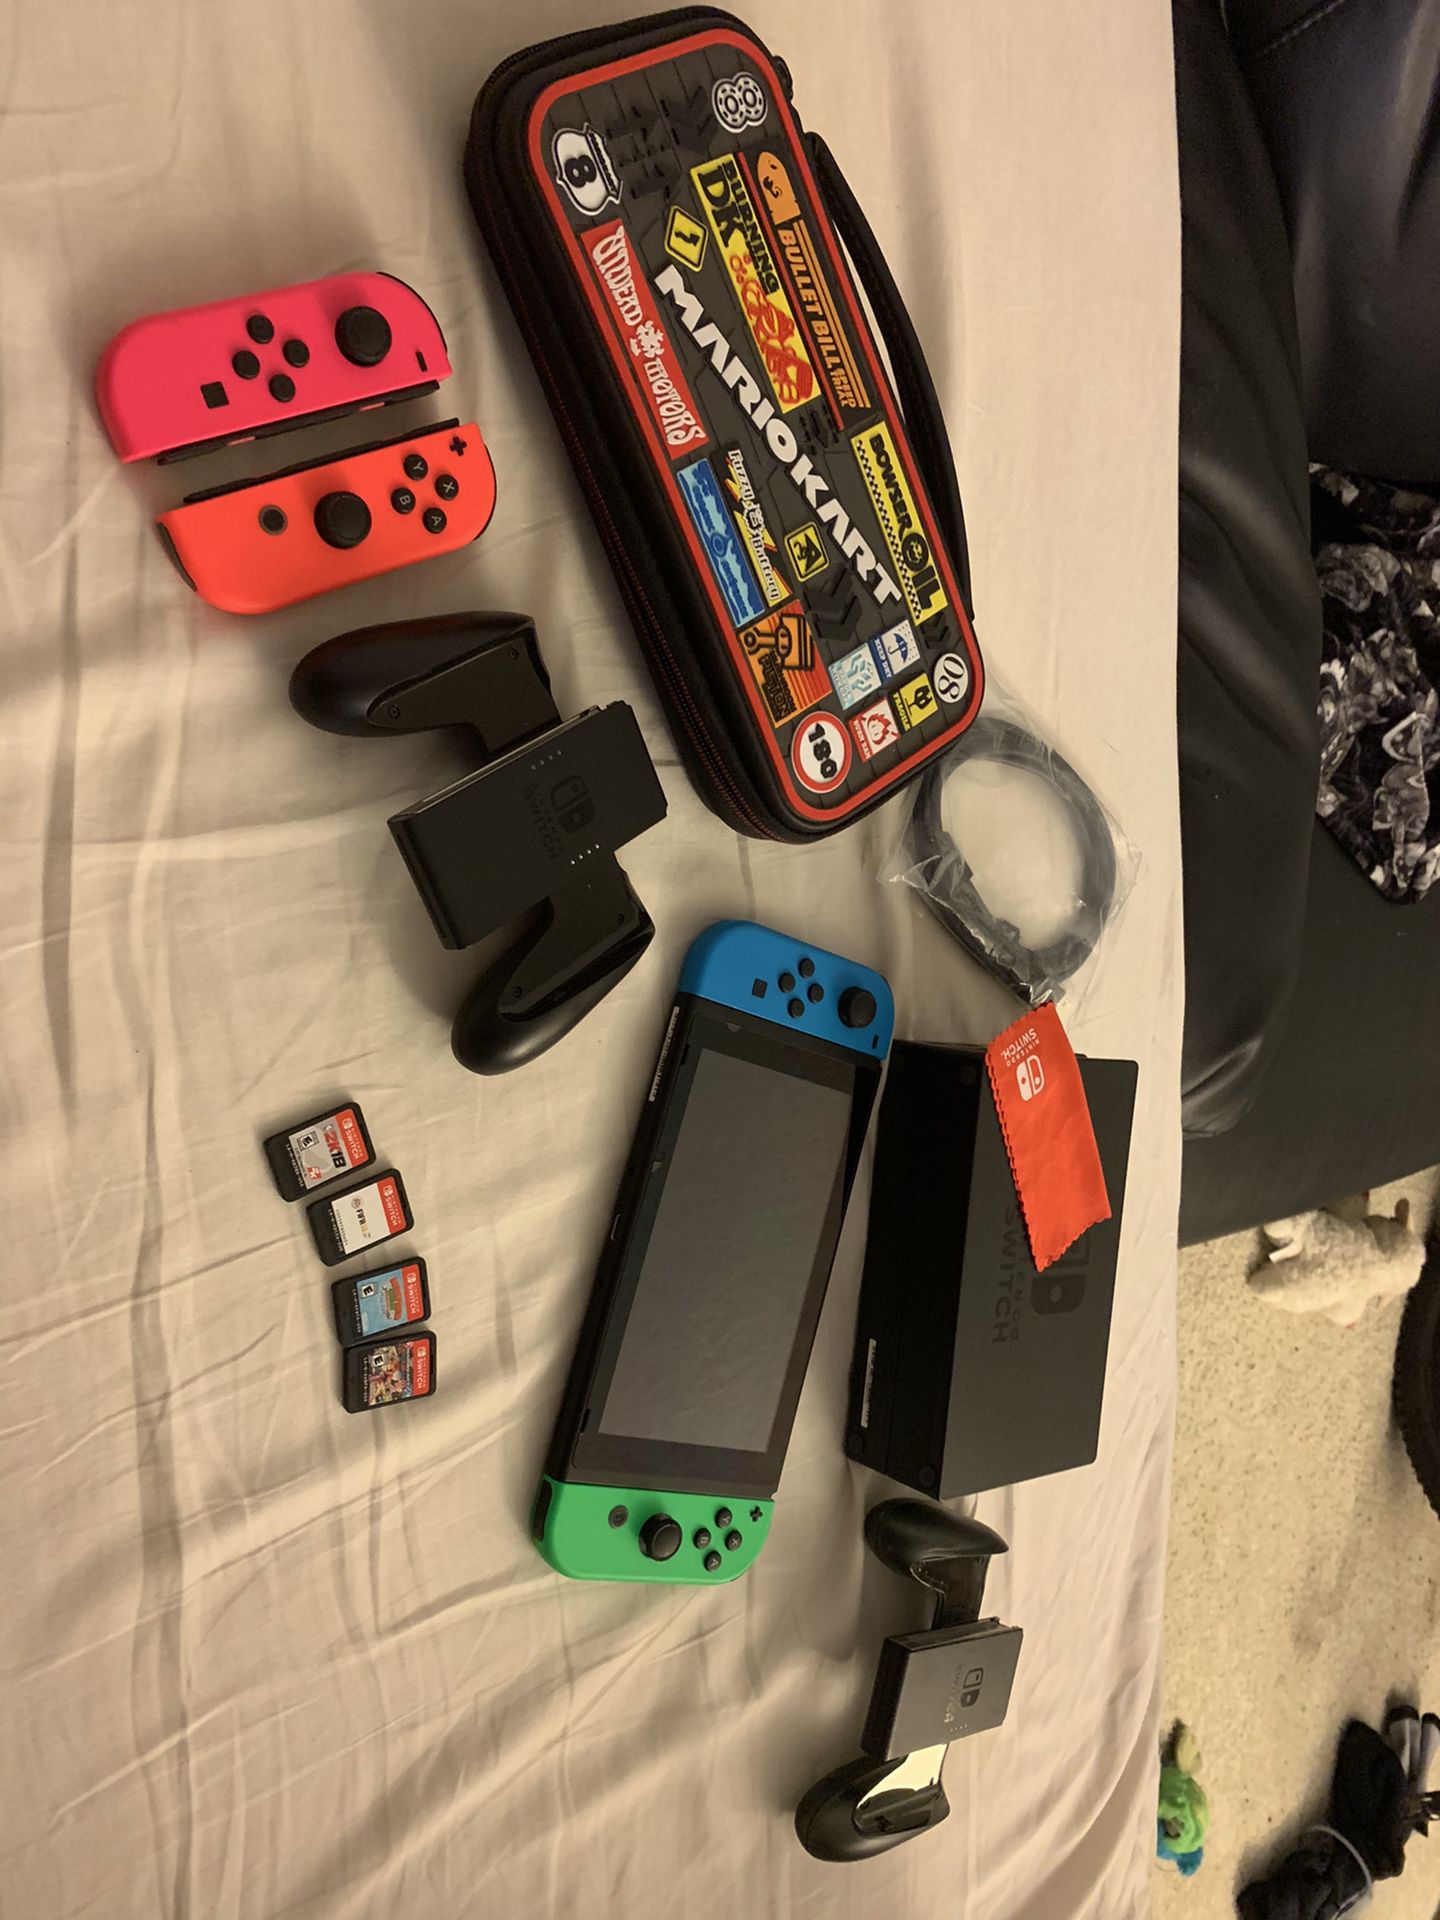 Nintendo Switch—— used 4 times on a flight